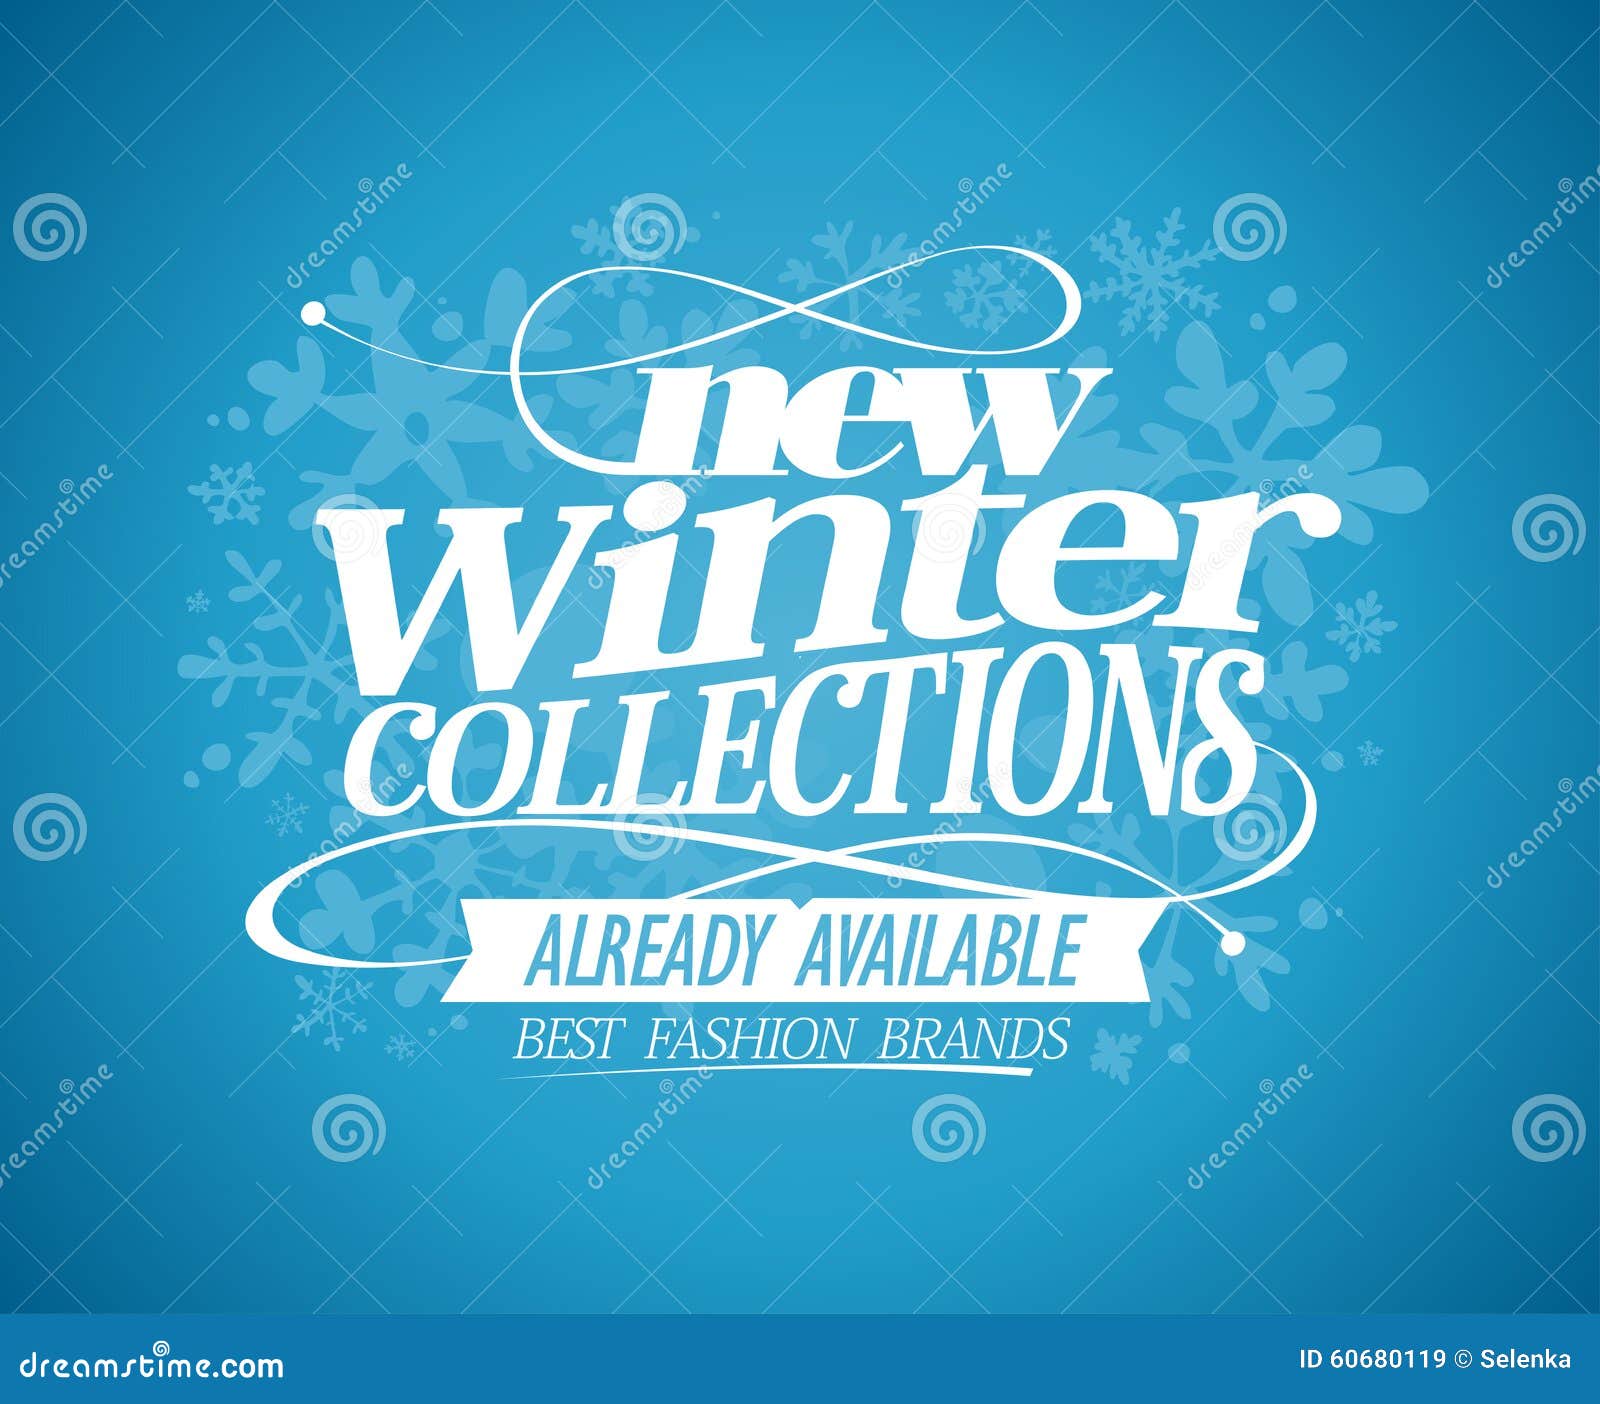 new winter collections already available.